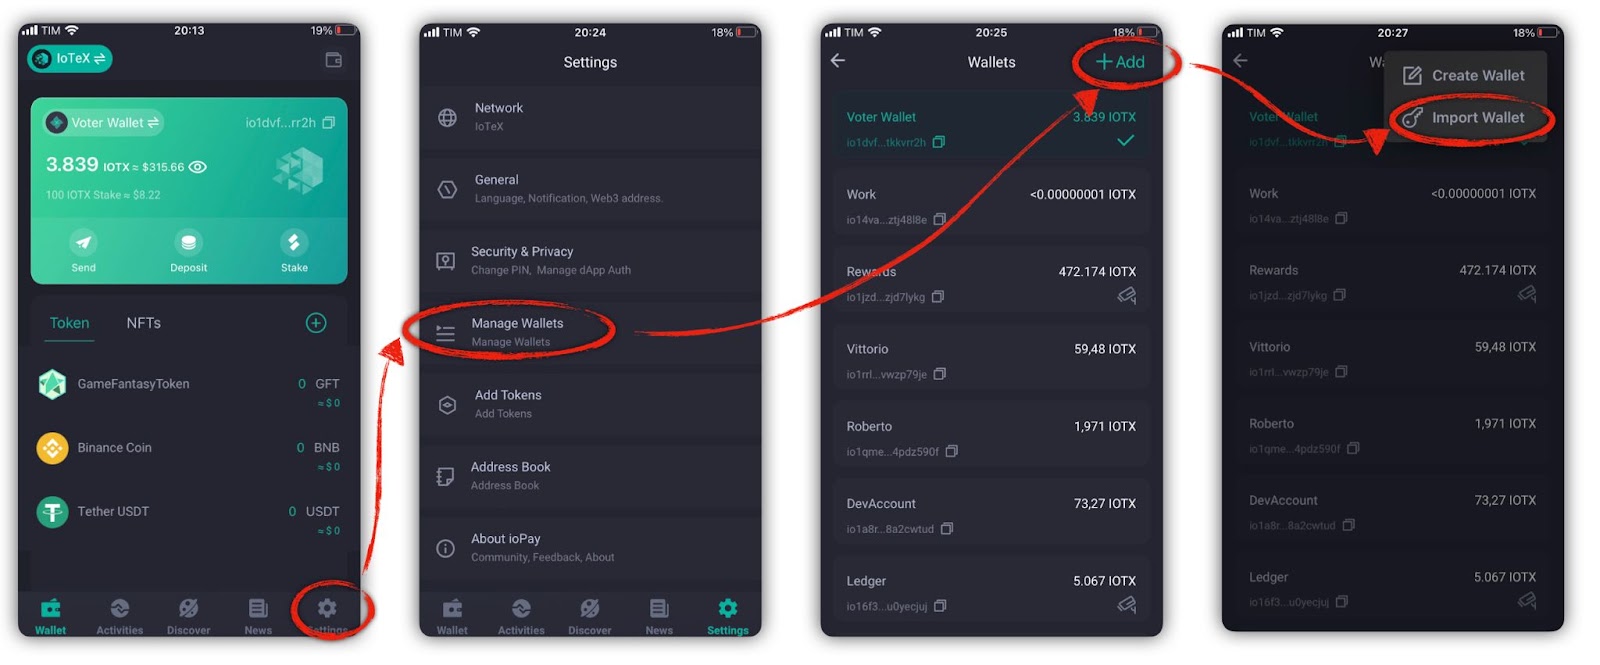 Screenshot of steps to import wallet in ioPay app